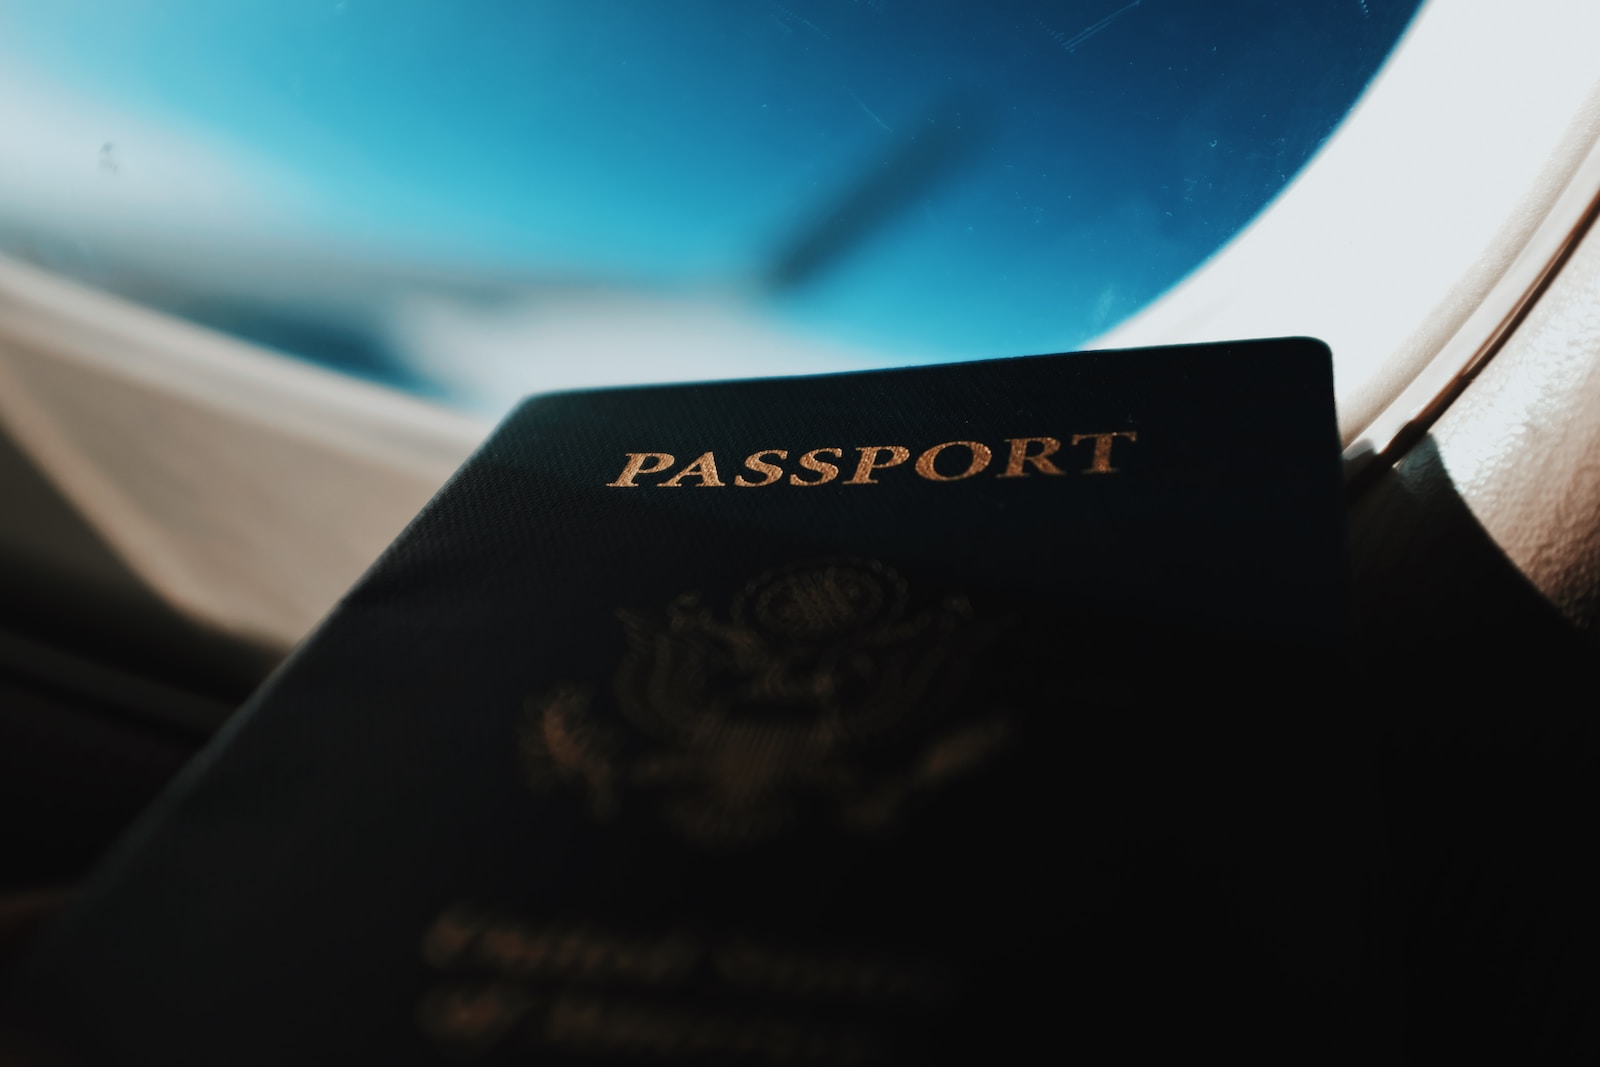 silhouette of passport booklet with airplane window background